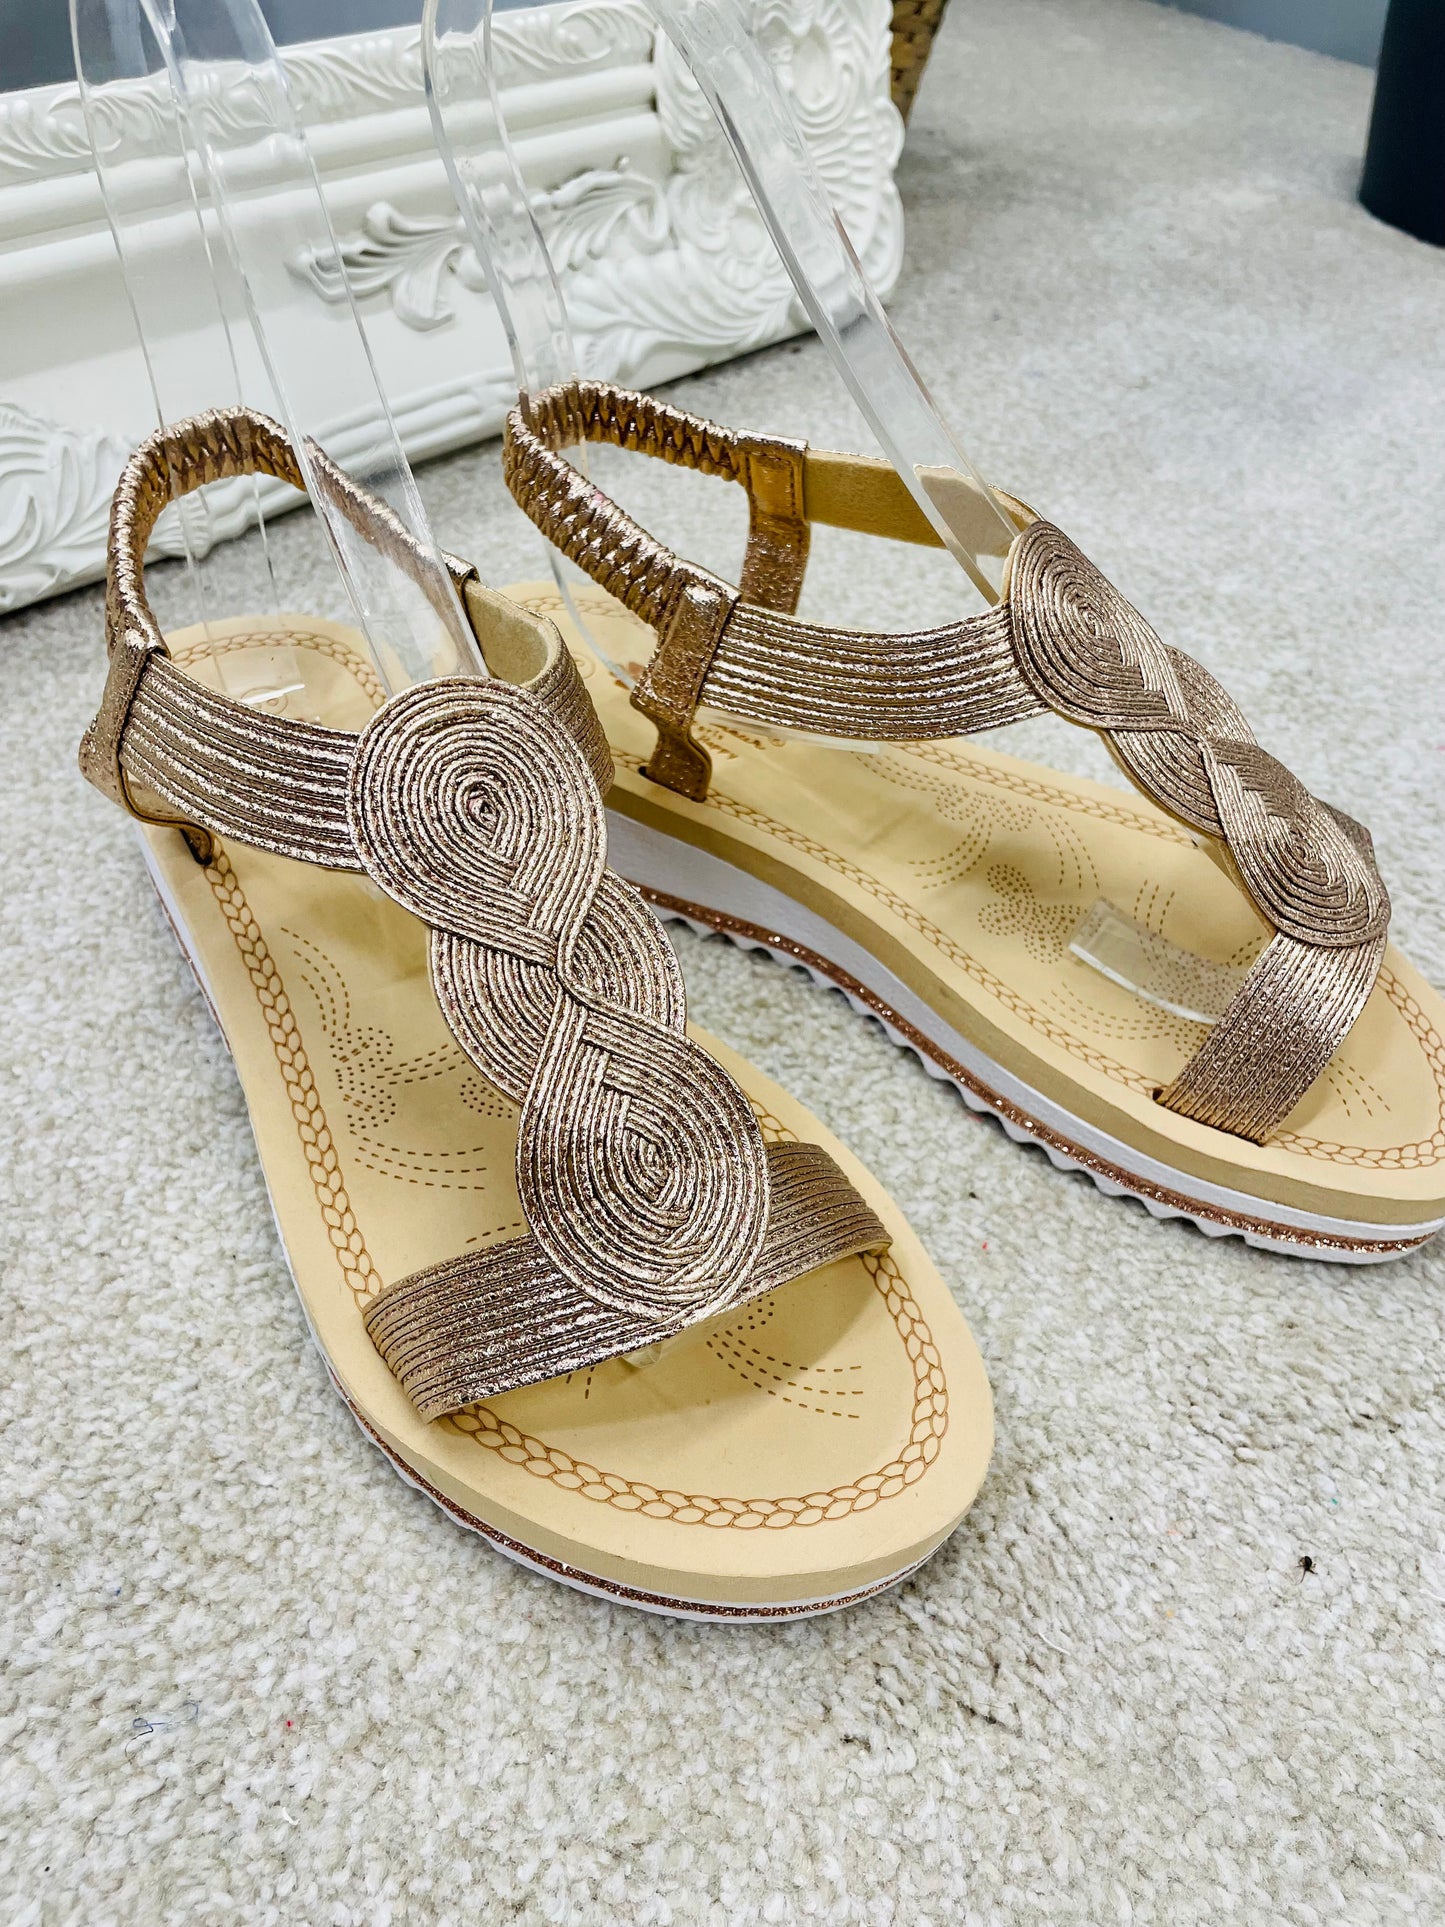 CHAMPAGNE SMALL WEDGE HEEL SANDALS ( 3319 )